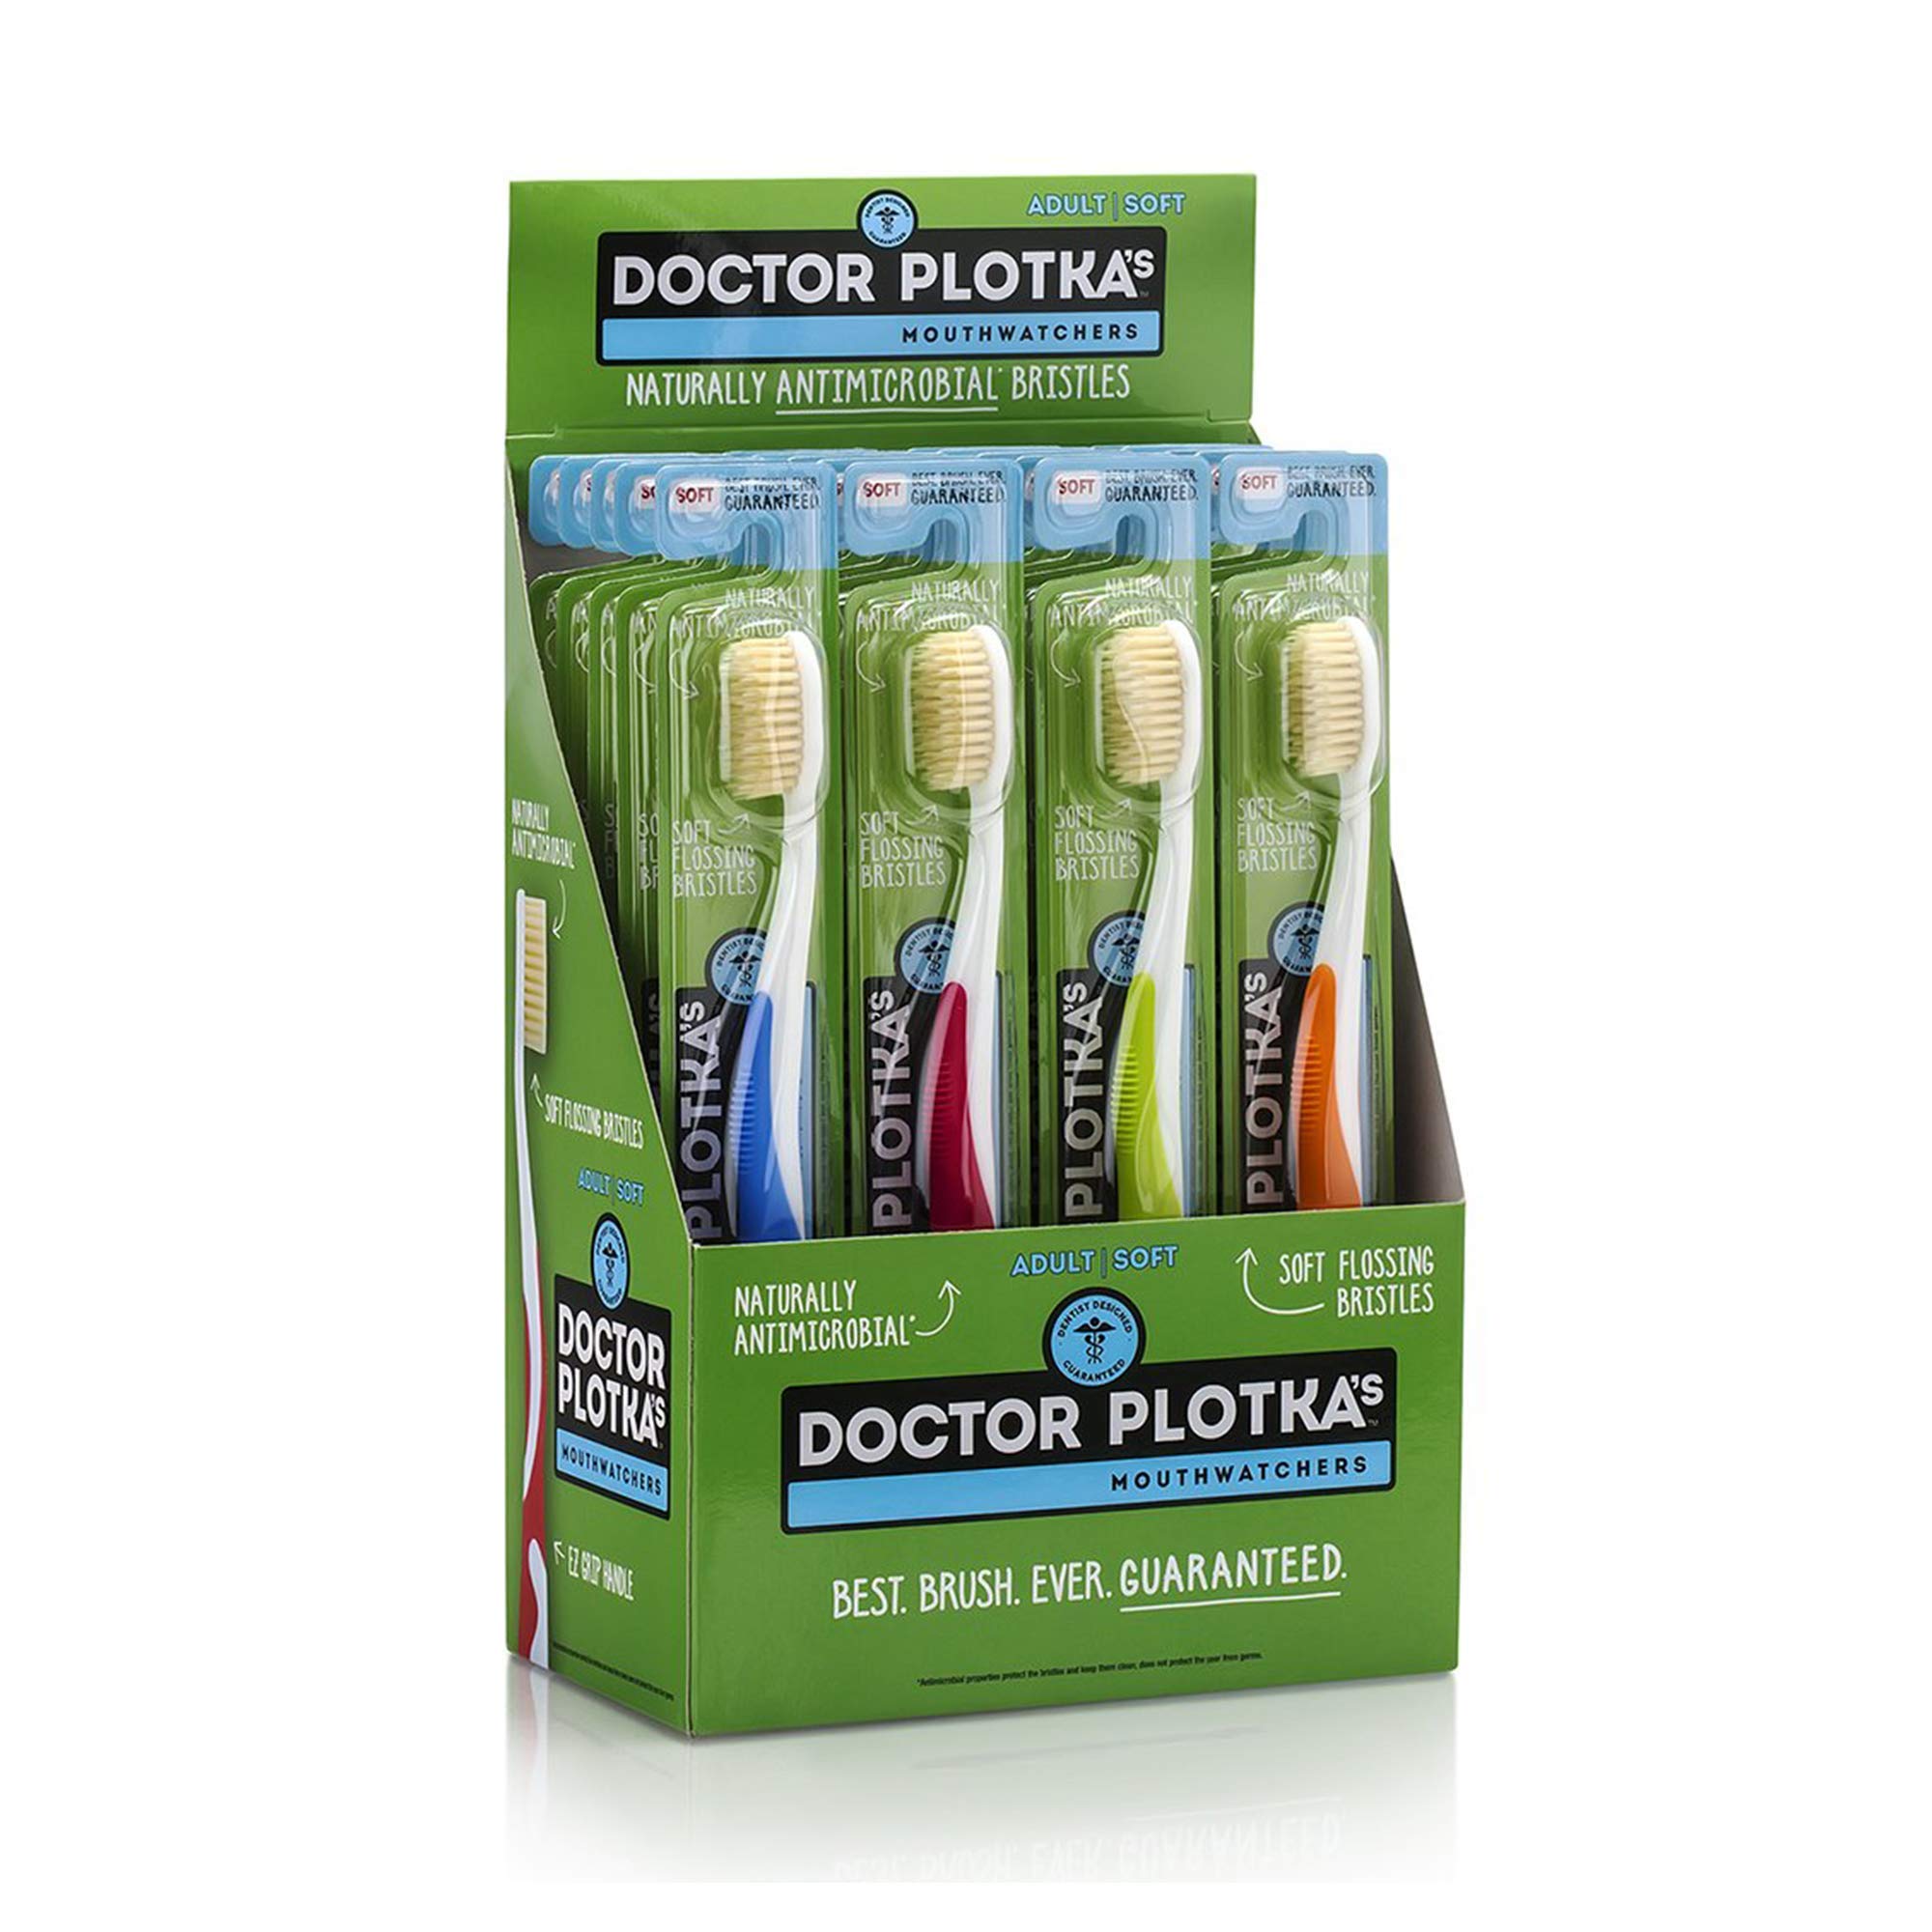 MOUTHWATCHERS Dr Plotkas Extra Soft Flossing Toothbrush Manual Soft Toothbrush for Adults, Ultra Clean Toothbrush, Good for Sens